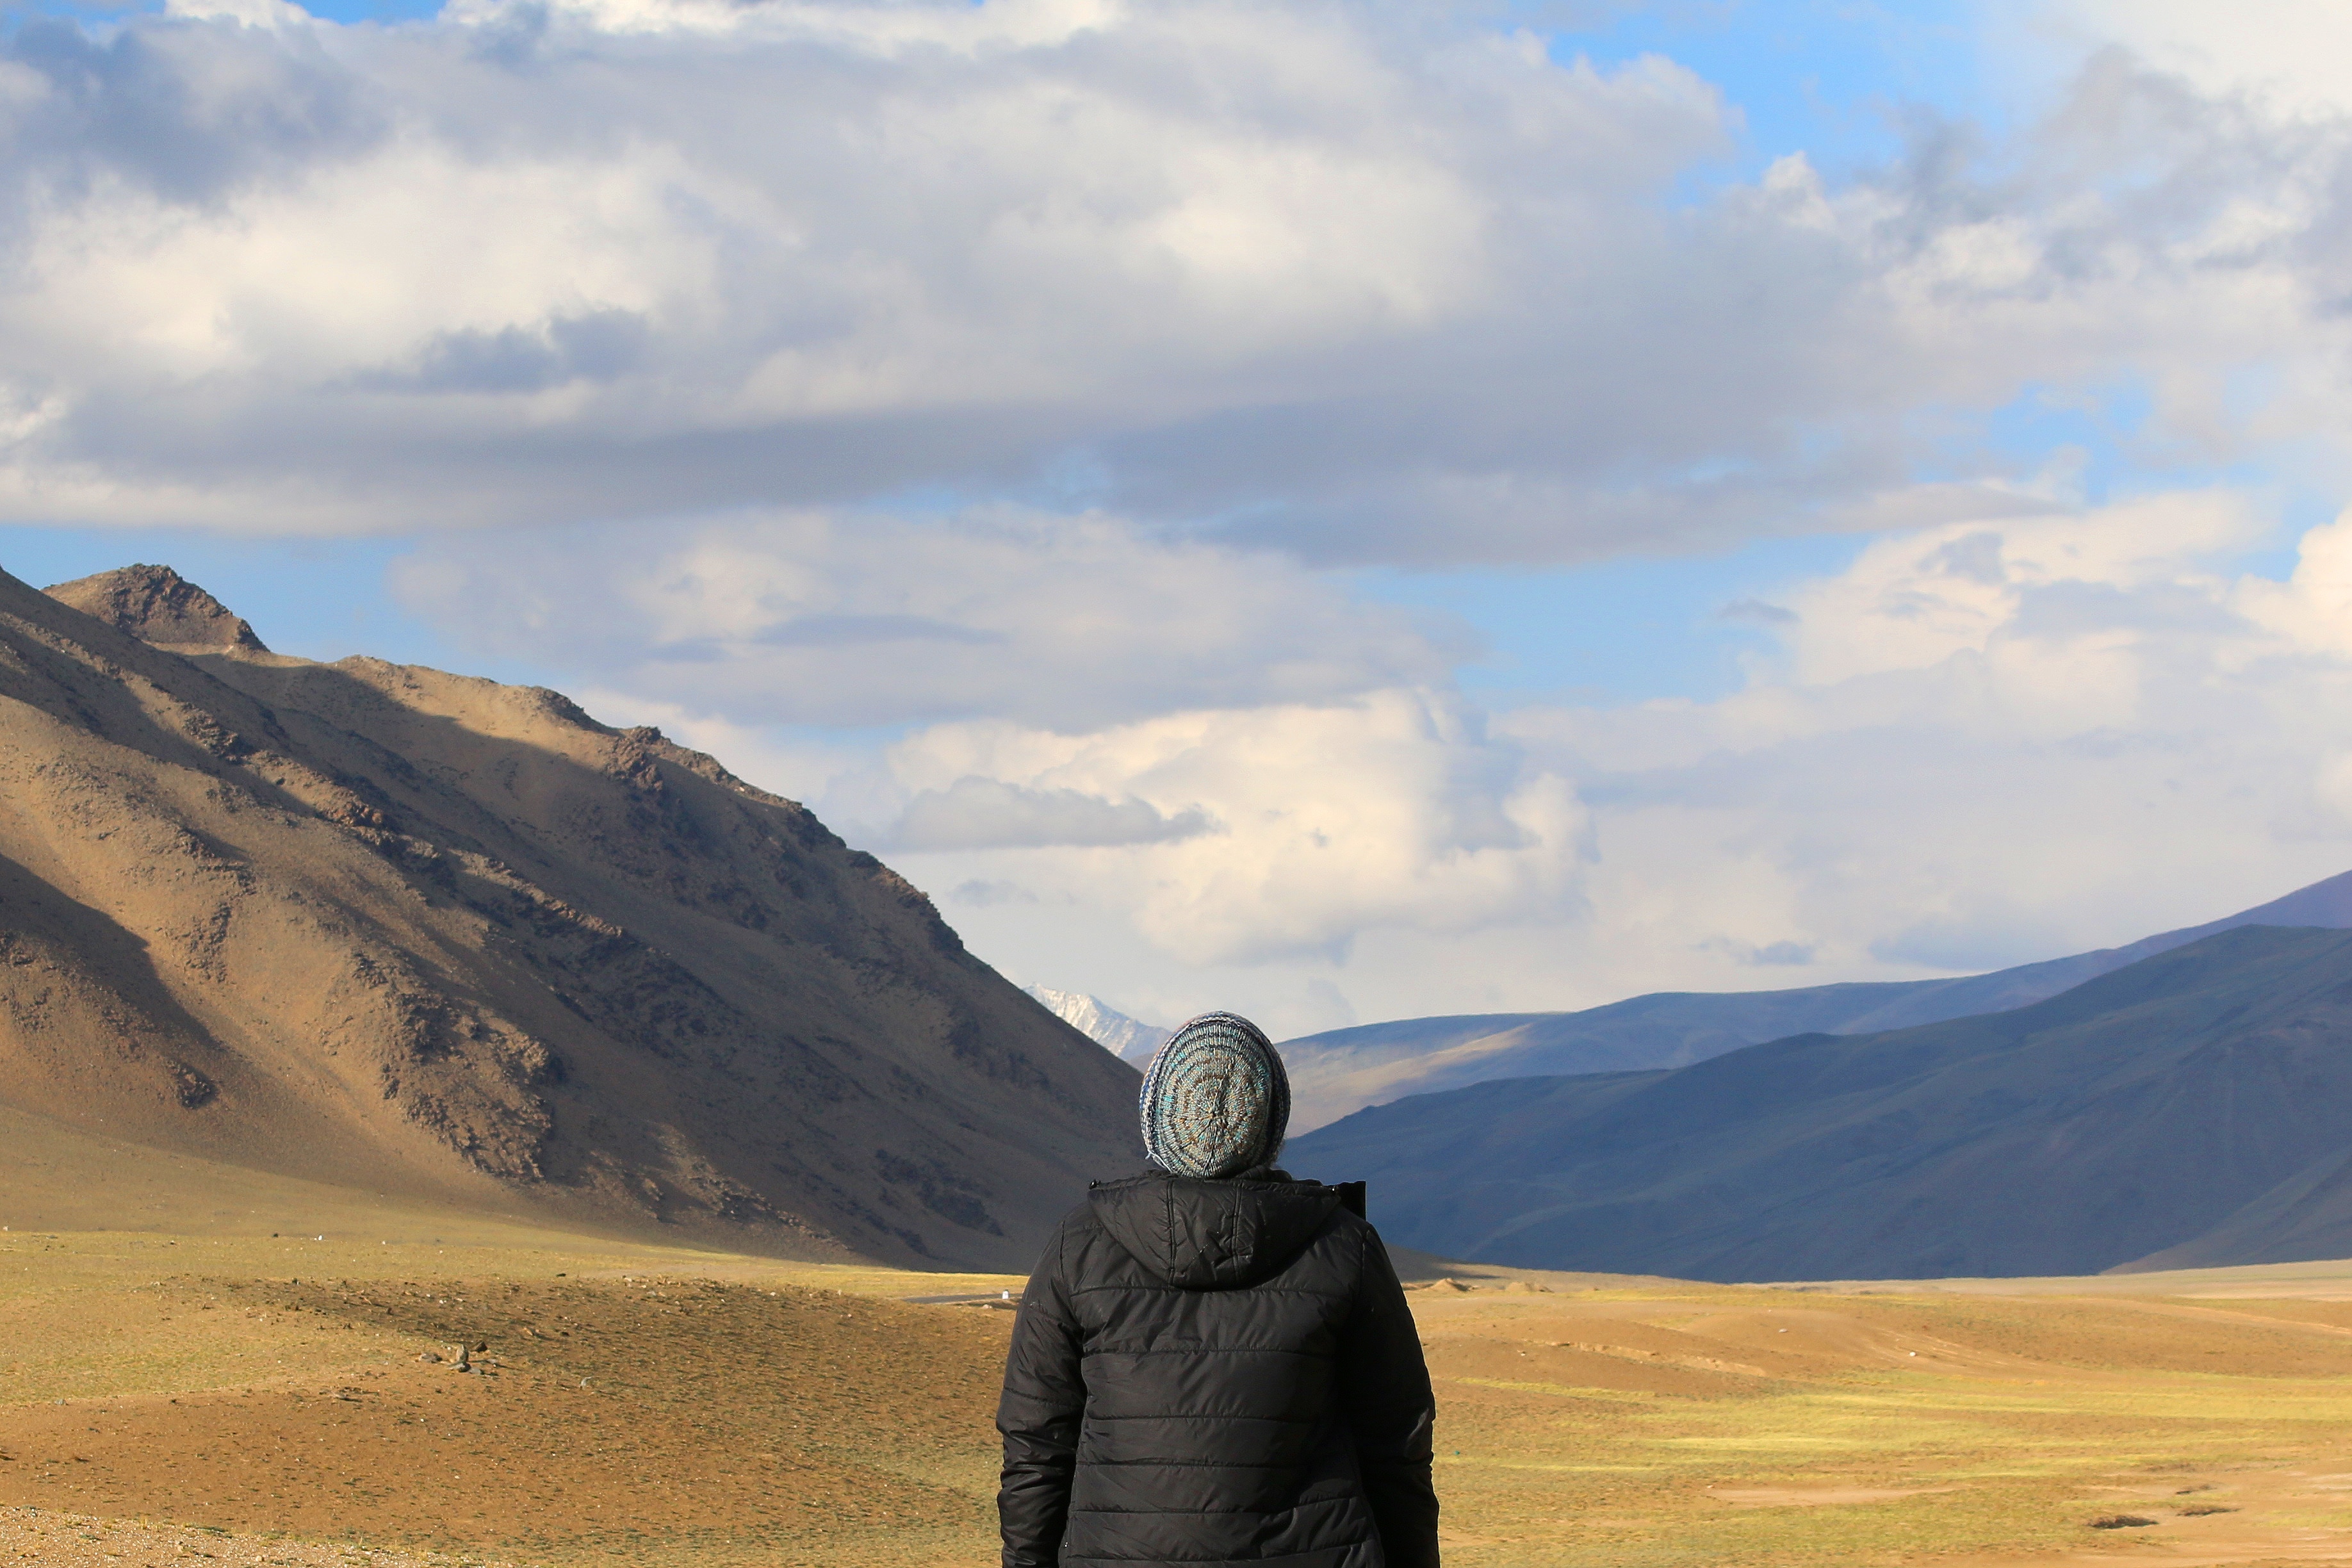 person in black bubble hoodie wearing grey knit cap standing on brown dirt road near rock formation during daytime